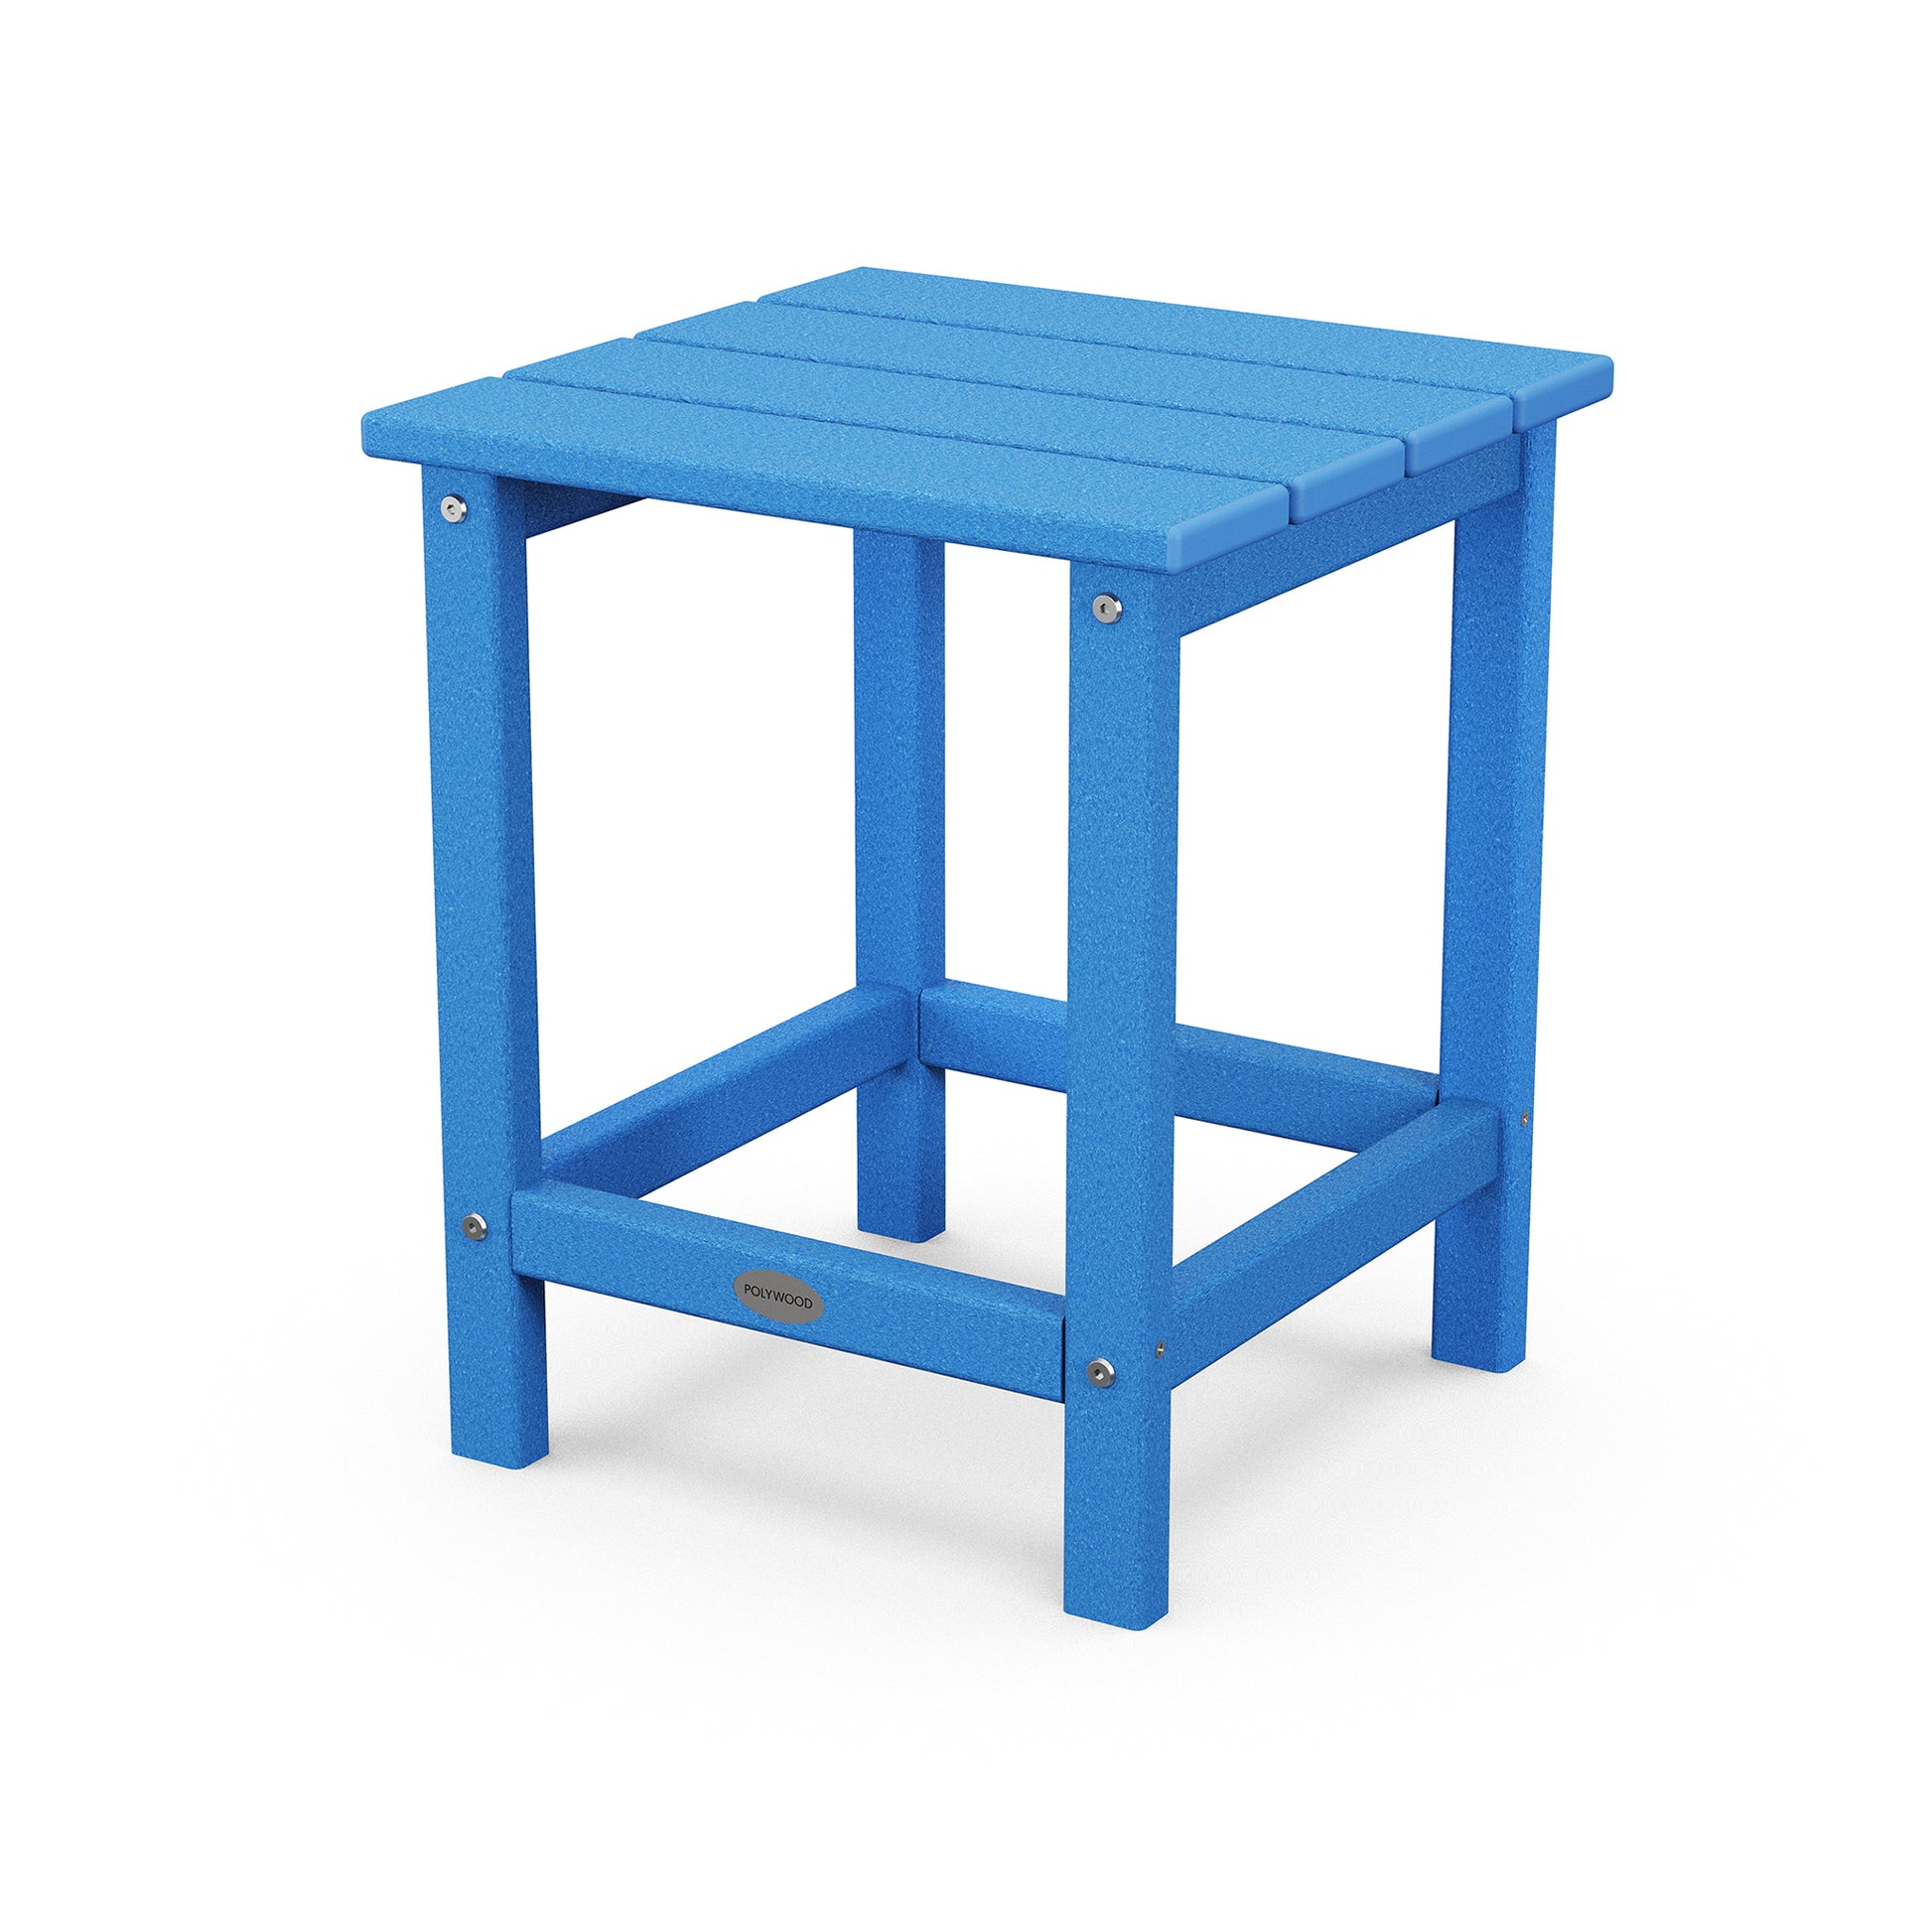 A blue POLYWOOD Long Island 18" side table with a simple, sturdy design, featuring a rectangular top and four legs connected by a lower shelf for additional support, isolated on a white background.